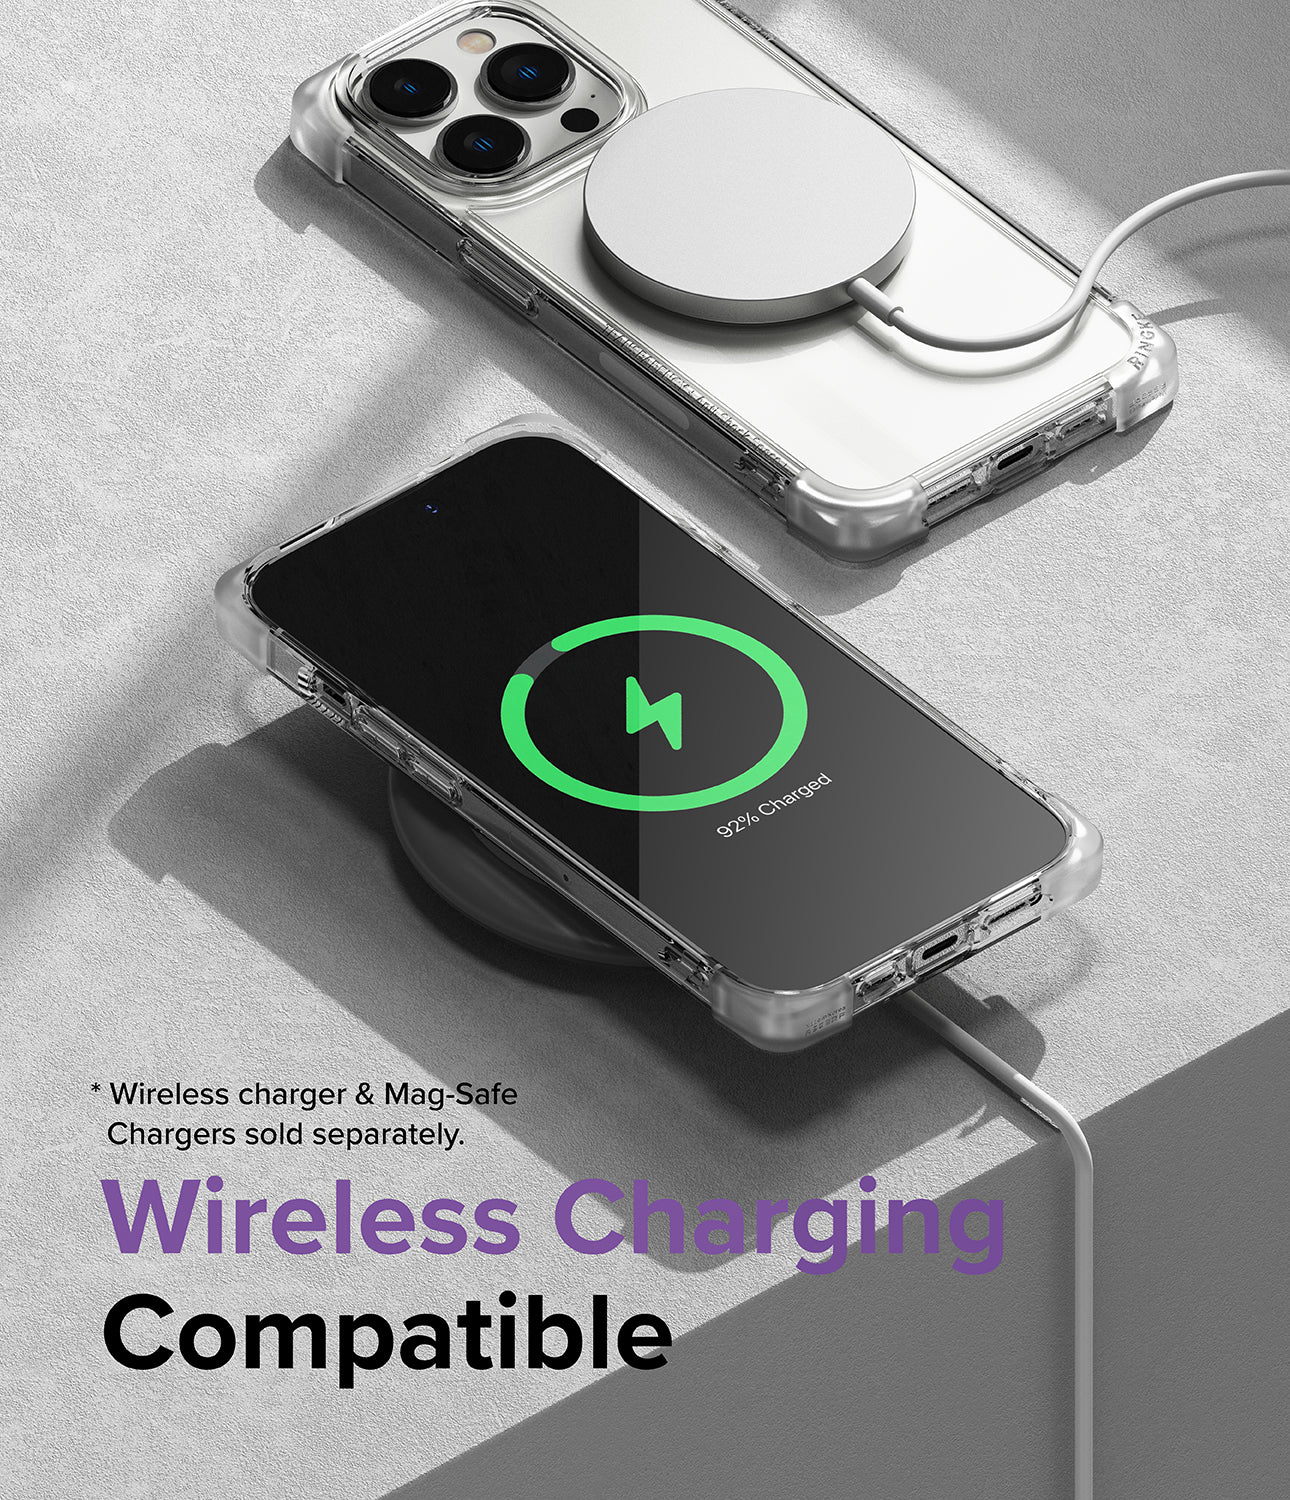 Wireless Charging Compatible - Wireless charger & Mag-Safe Chargers sold separately.